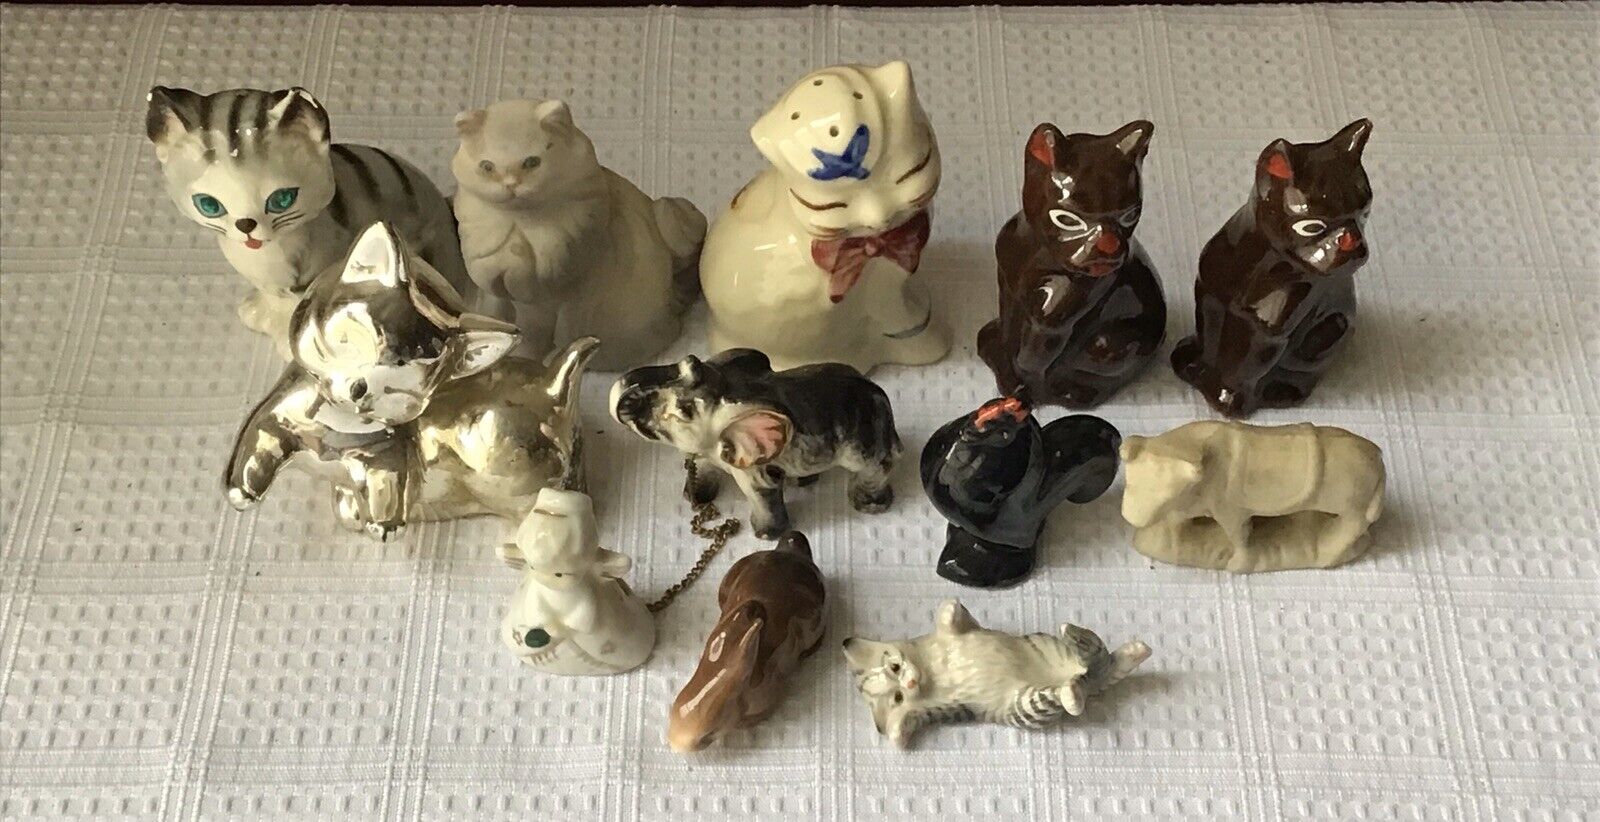 Collection Of 12 Porcelain/ Ceramic/ Other Animal Figurines, 1 Is A Salt Shaker